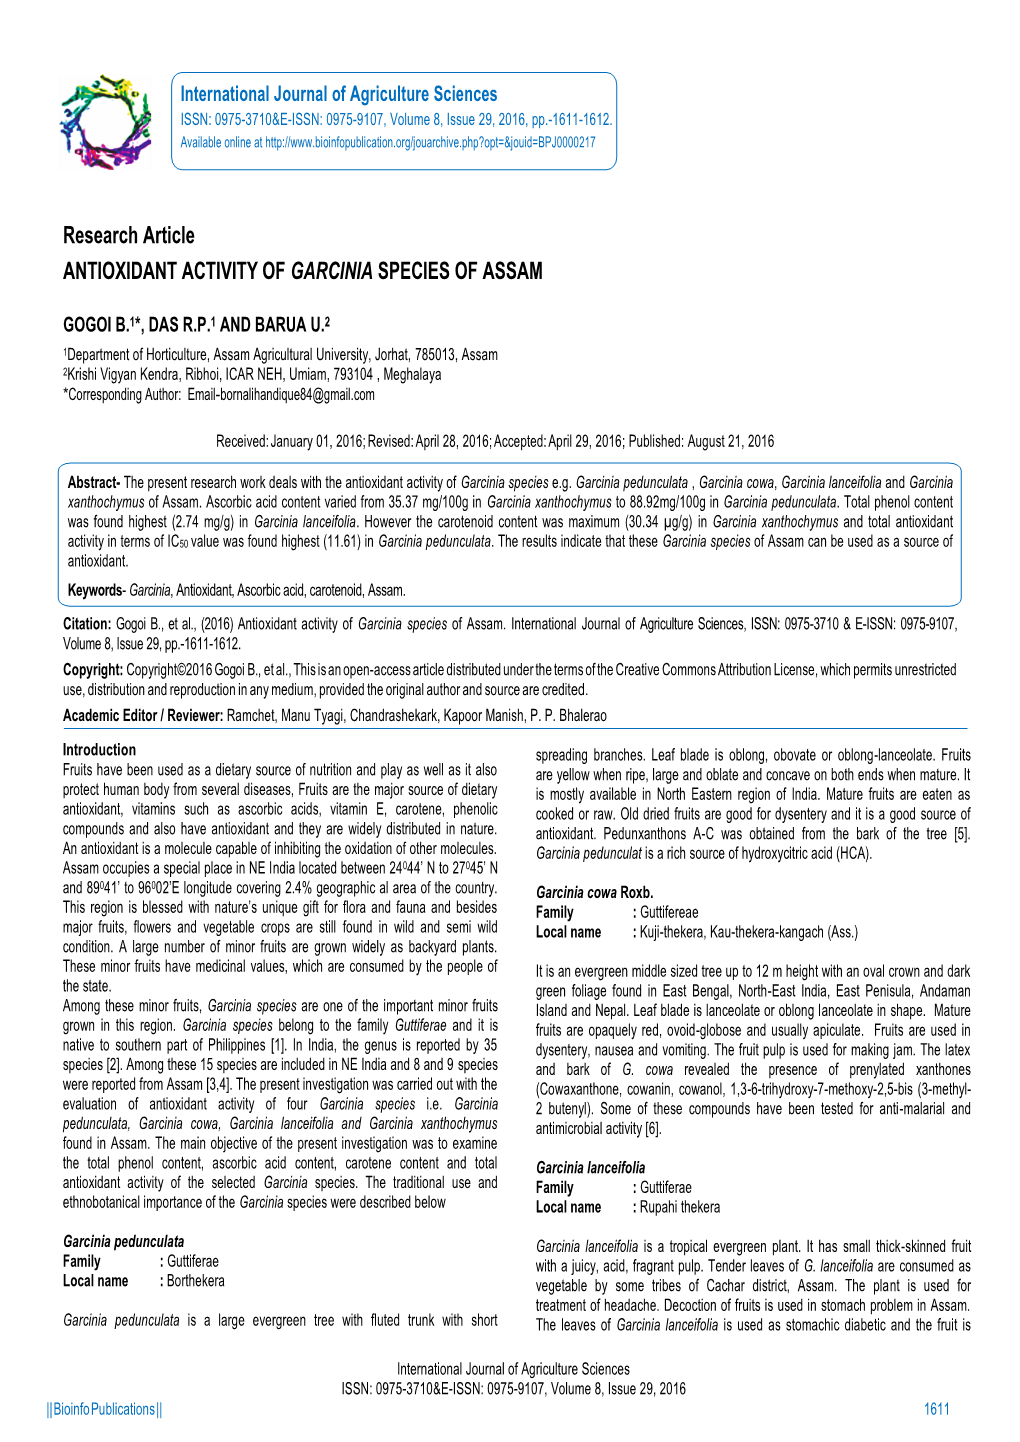 Research Article ANTIOXIDANT ACTIVITY of GARCINIA SPECIES of ASSAM